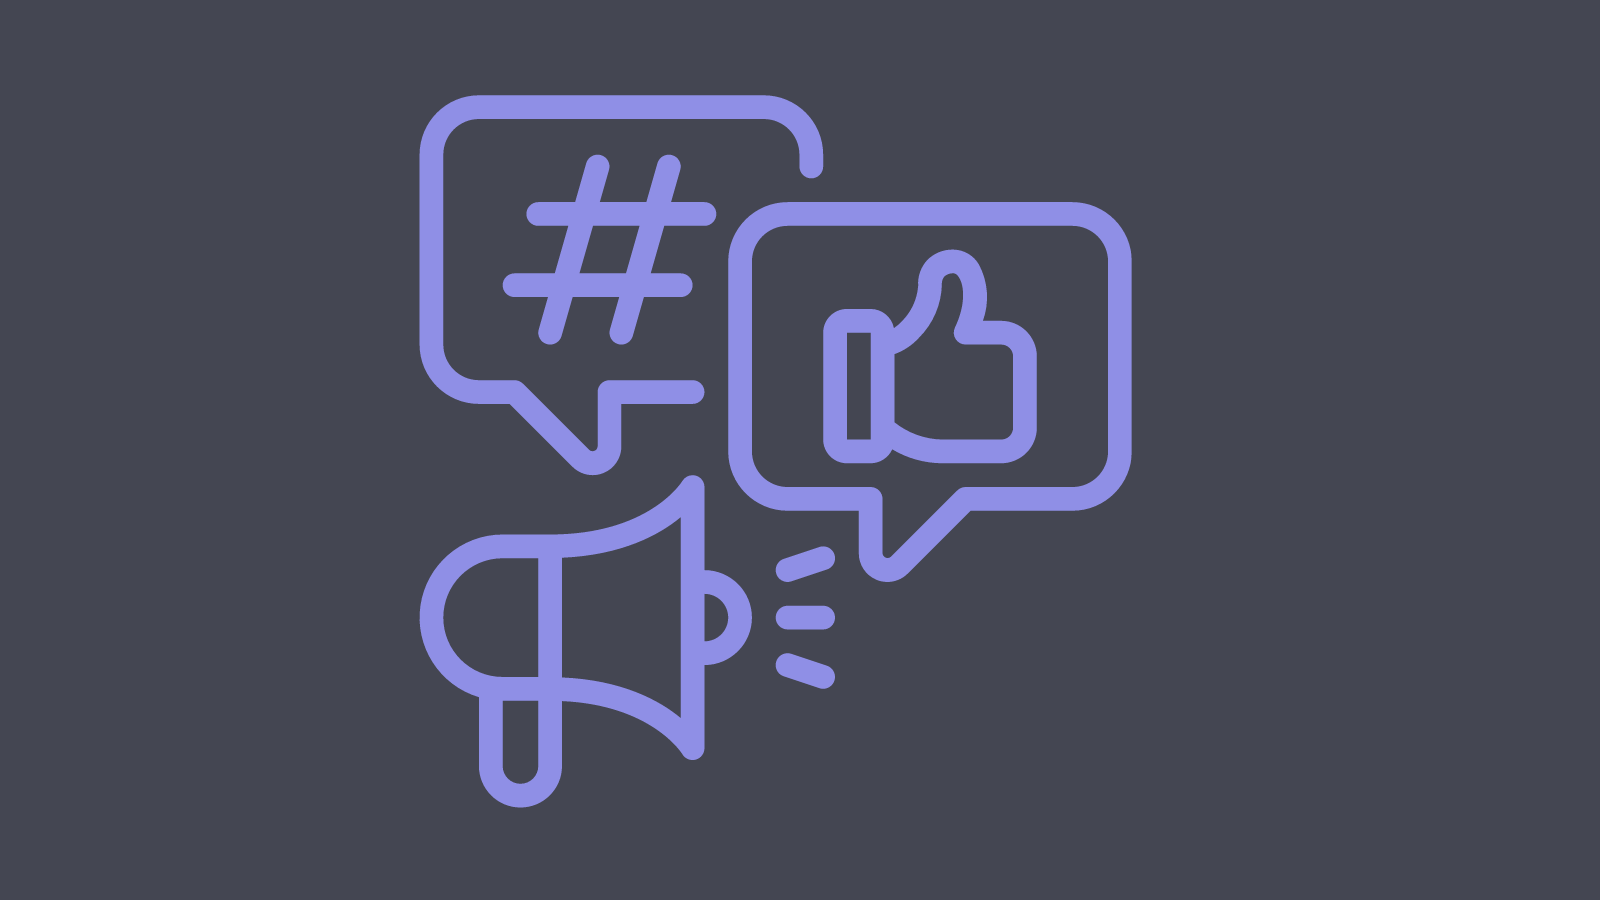 A simple line drawing of a megaphone with two speech bubbles pointing towards it one with a hashtag and one with a thumbs up icon